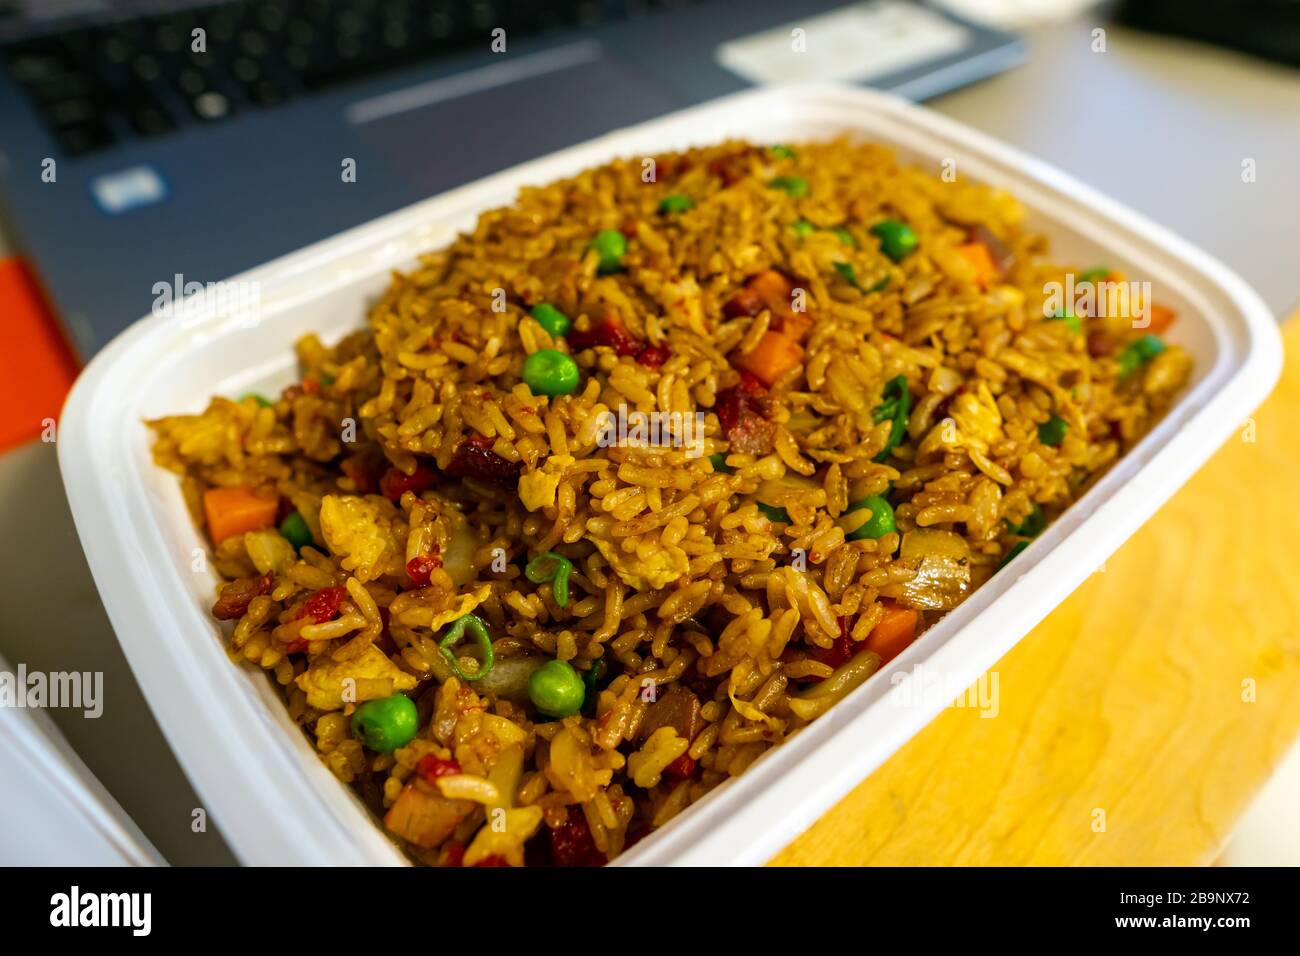 Cha siu Fried rice in a take out box Stock Photo